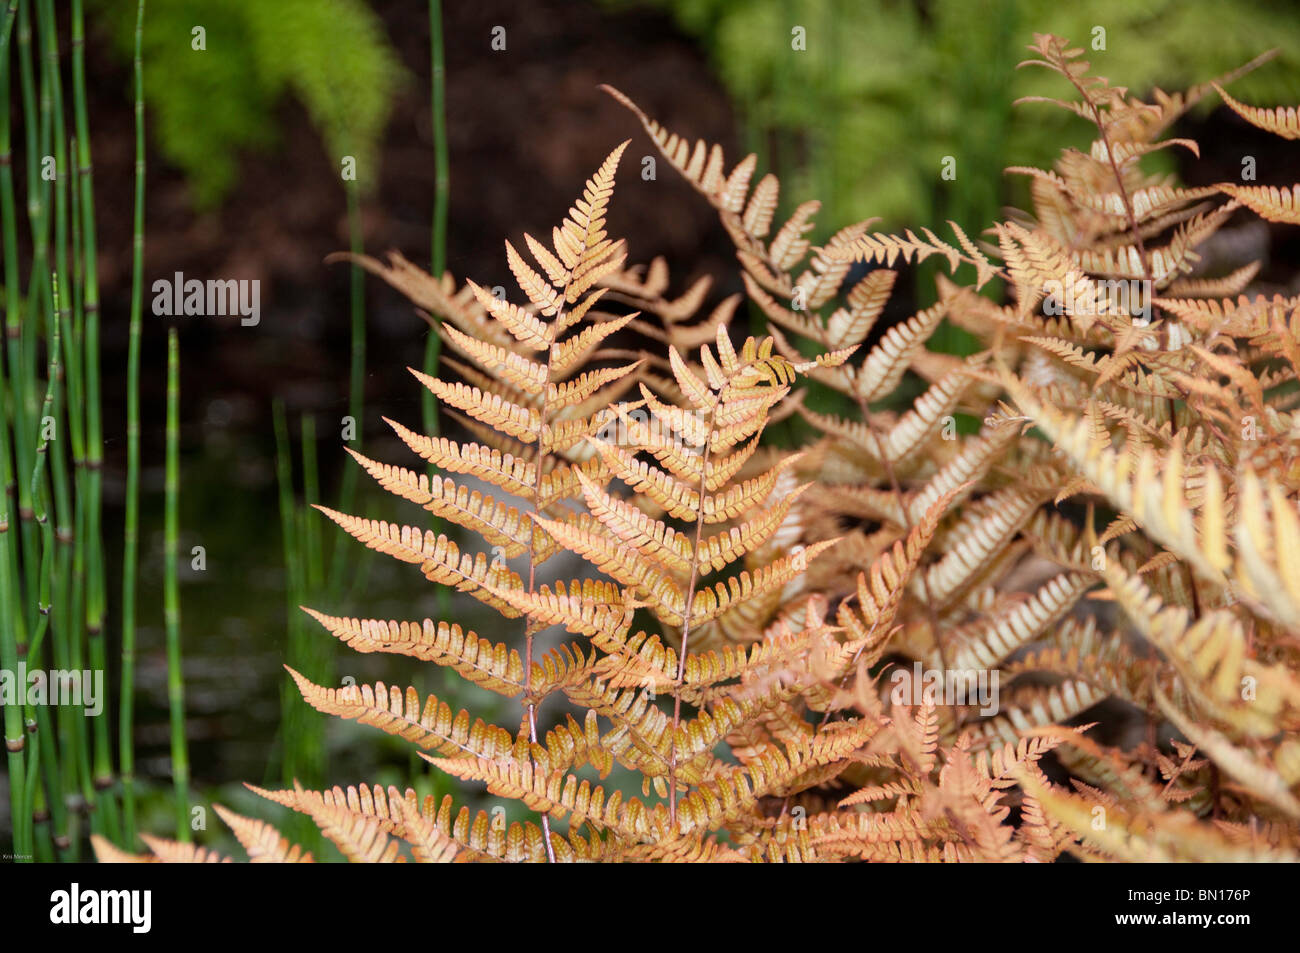 Pond side fern, Dryopteris ery-throsora. with pond plant, Equisetum, in the background Stock Photo